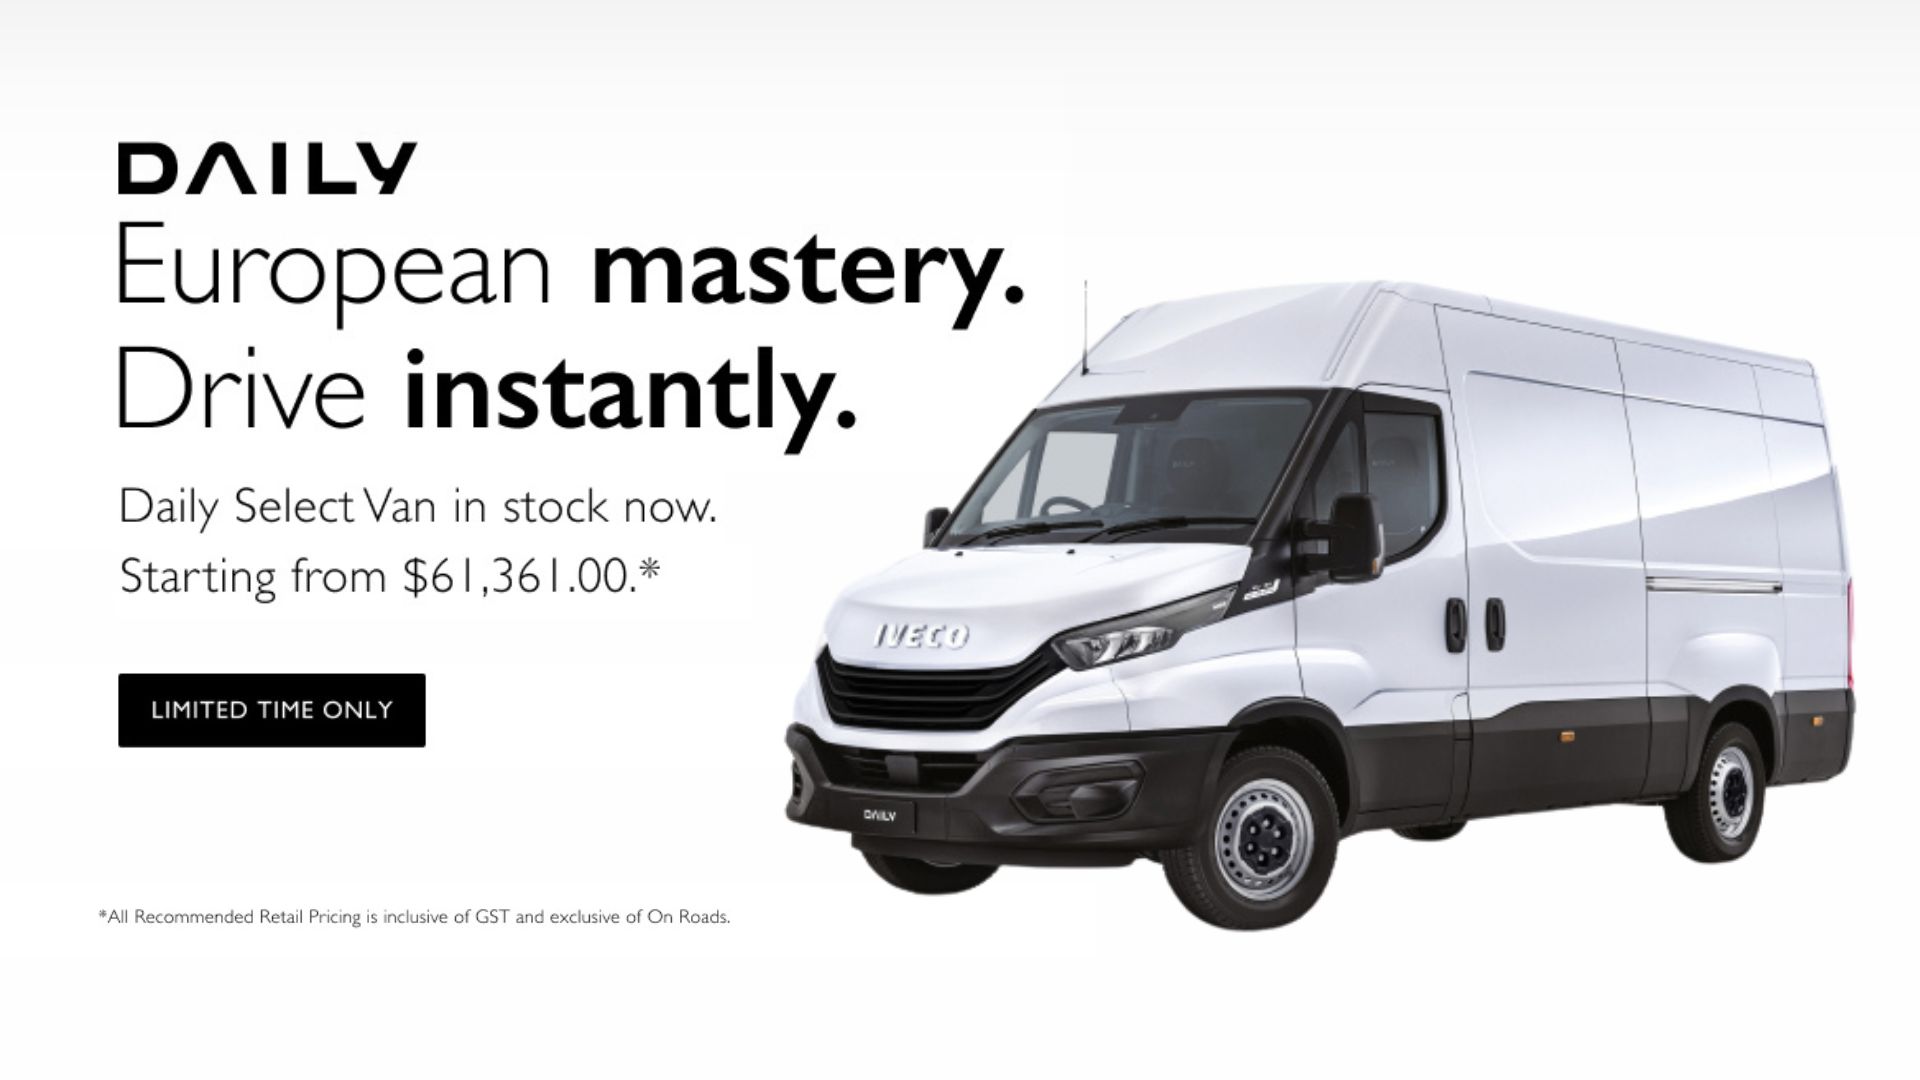 Daily Select Van. In Stock Now.  European Mastery. Drive Instantly.